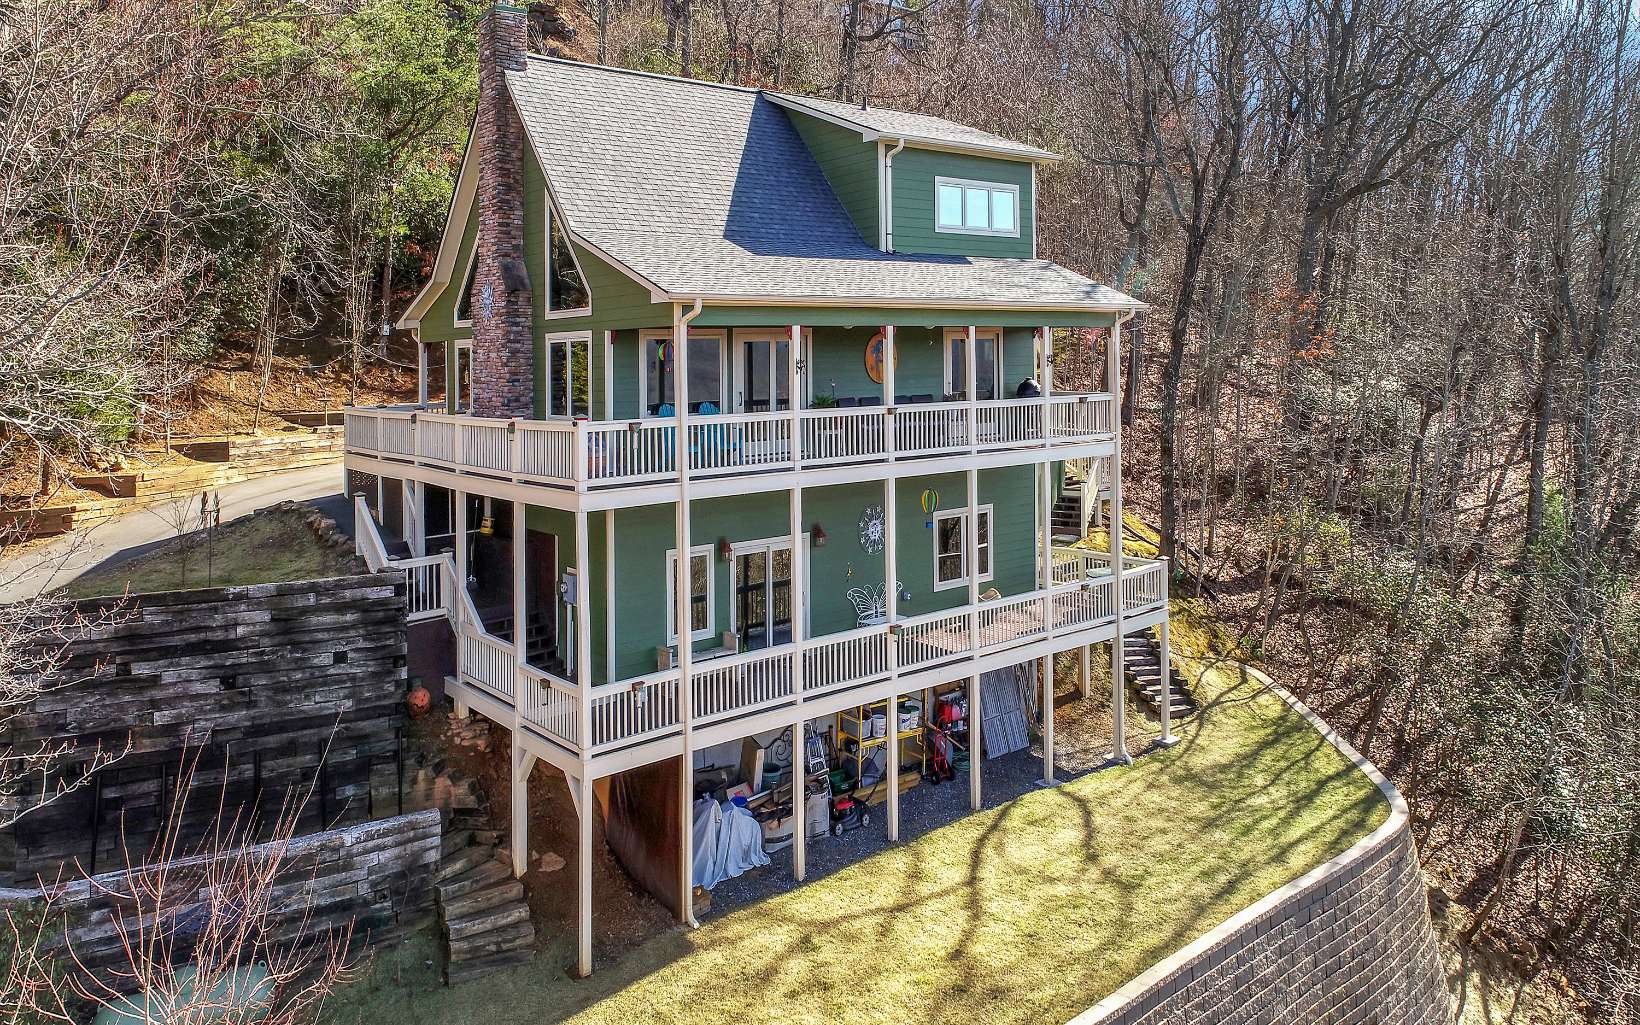 Big mountain and lake views in the heart of downtown Hiawassee. 3bdr/3bth/3story, completely renovated home. Pella windows, new smart appliances, Trane AC, new water heater, newly built 20 foot retaining wall with 20 feet of usable yard space. Electric, gated driveway, 240amp RV Hookup and many more upgrades! Being sold with two adjacent lots, all together equaling 1.15 acres that offer total privacy while still being in a neighborhood setting. Two minutes from groceries, restaurants and shopping. Five minutes from boat launch, kayak launch, and soon to be built boardwalk at Lloyd's Landing. Relax on your wrap around porch as you enjoy the everchanging scenery. Music on the Town Square, a front seat to the holiday fireworks shows, church bells and amazing sunsets can be enjoyed right from your deck. This home would make a great short-term rental, vacation home or full time residence. This location has the best of everything and is move in ready!